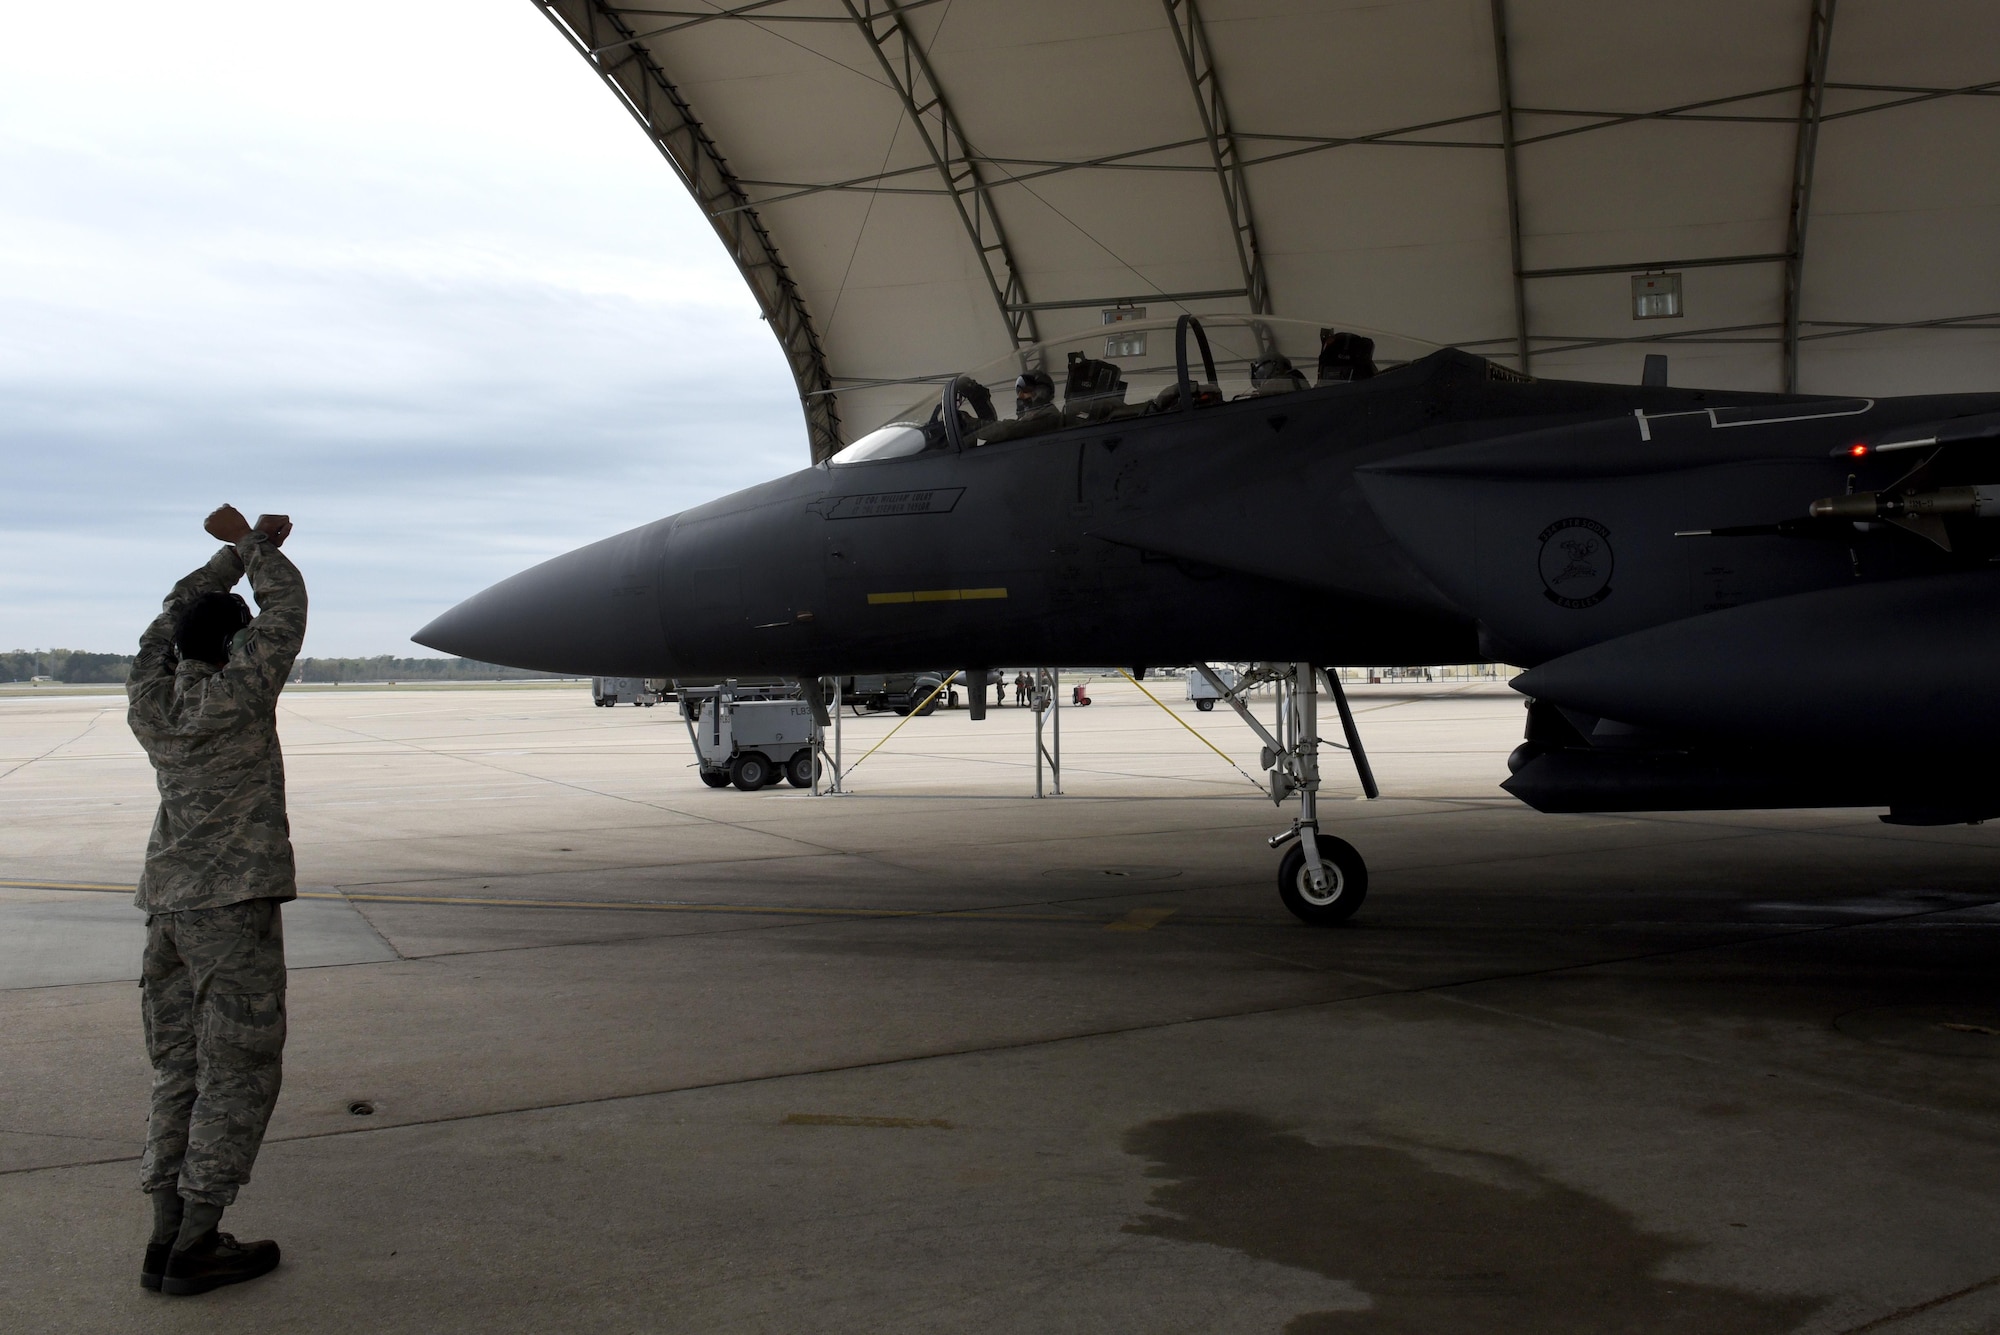 Lt. Col. Stephen Taylor, 334th Fighter Squadron assistant director of operations, completes his final flight in the F-15E Strike Eagle, March 30, 2017, at Seymour Johnson Air Force Base, North Carolina. Taylor reached the milestone of flying 3,000 hours in the F-15E earlier this month. (U.S. Air Force photo by Airman 1st Class Victoria Boyton) 